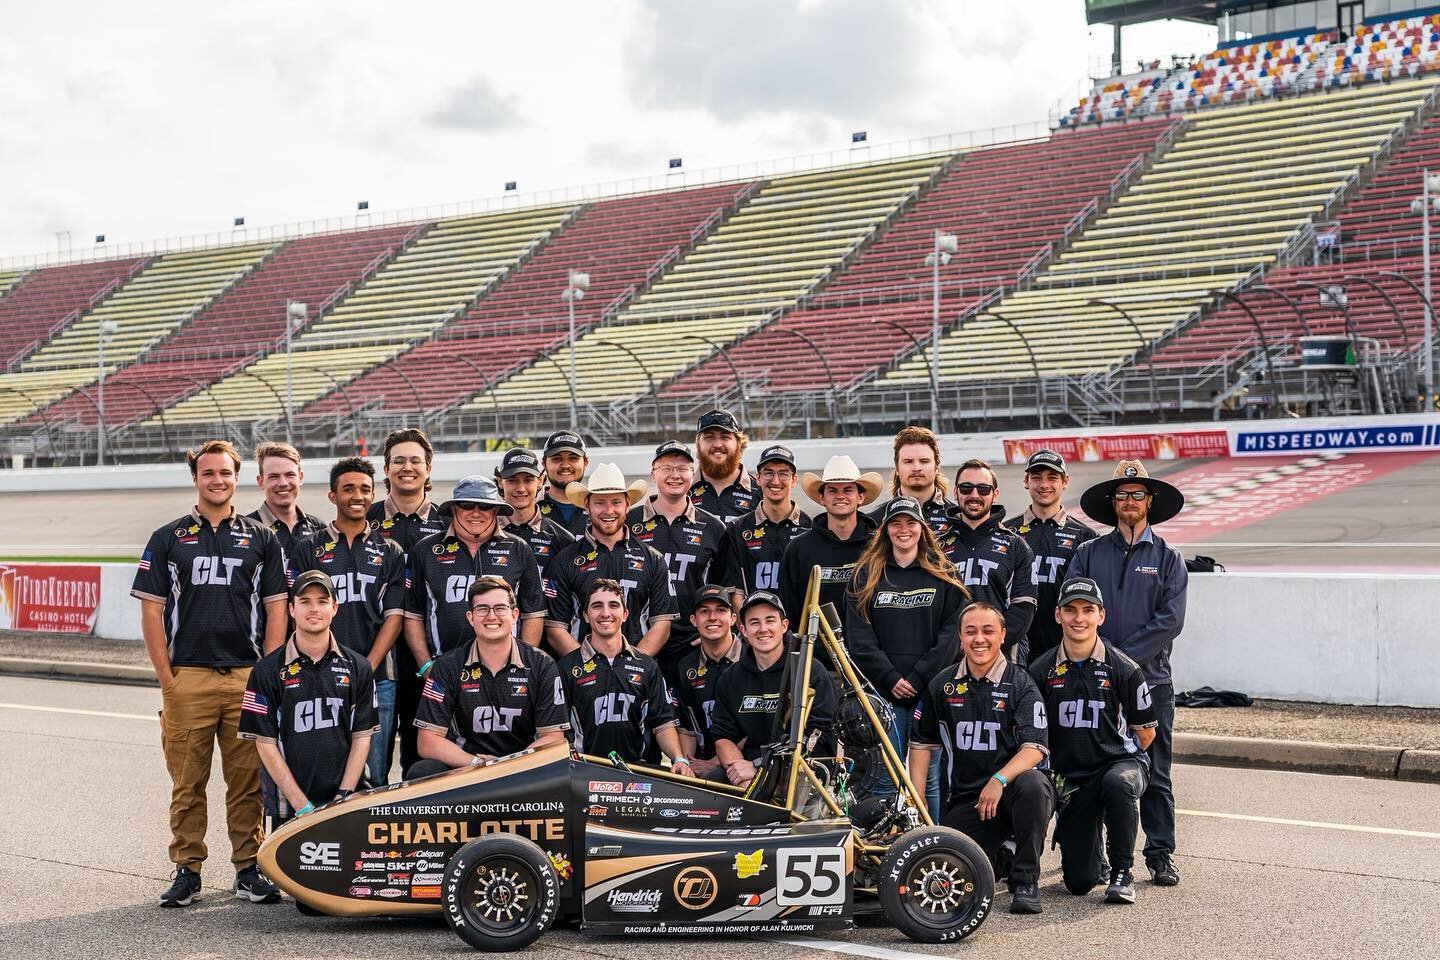 We&rsquo;re so back. 

Last year it took a team: it took one again this year. But with our students, faculty, sponsors, and more, we have successfully placed 9th overall at the 2023 FSAE IC competition at Michigan. We also placed 2nd in efficiency, a